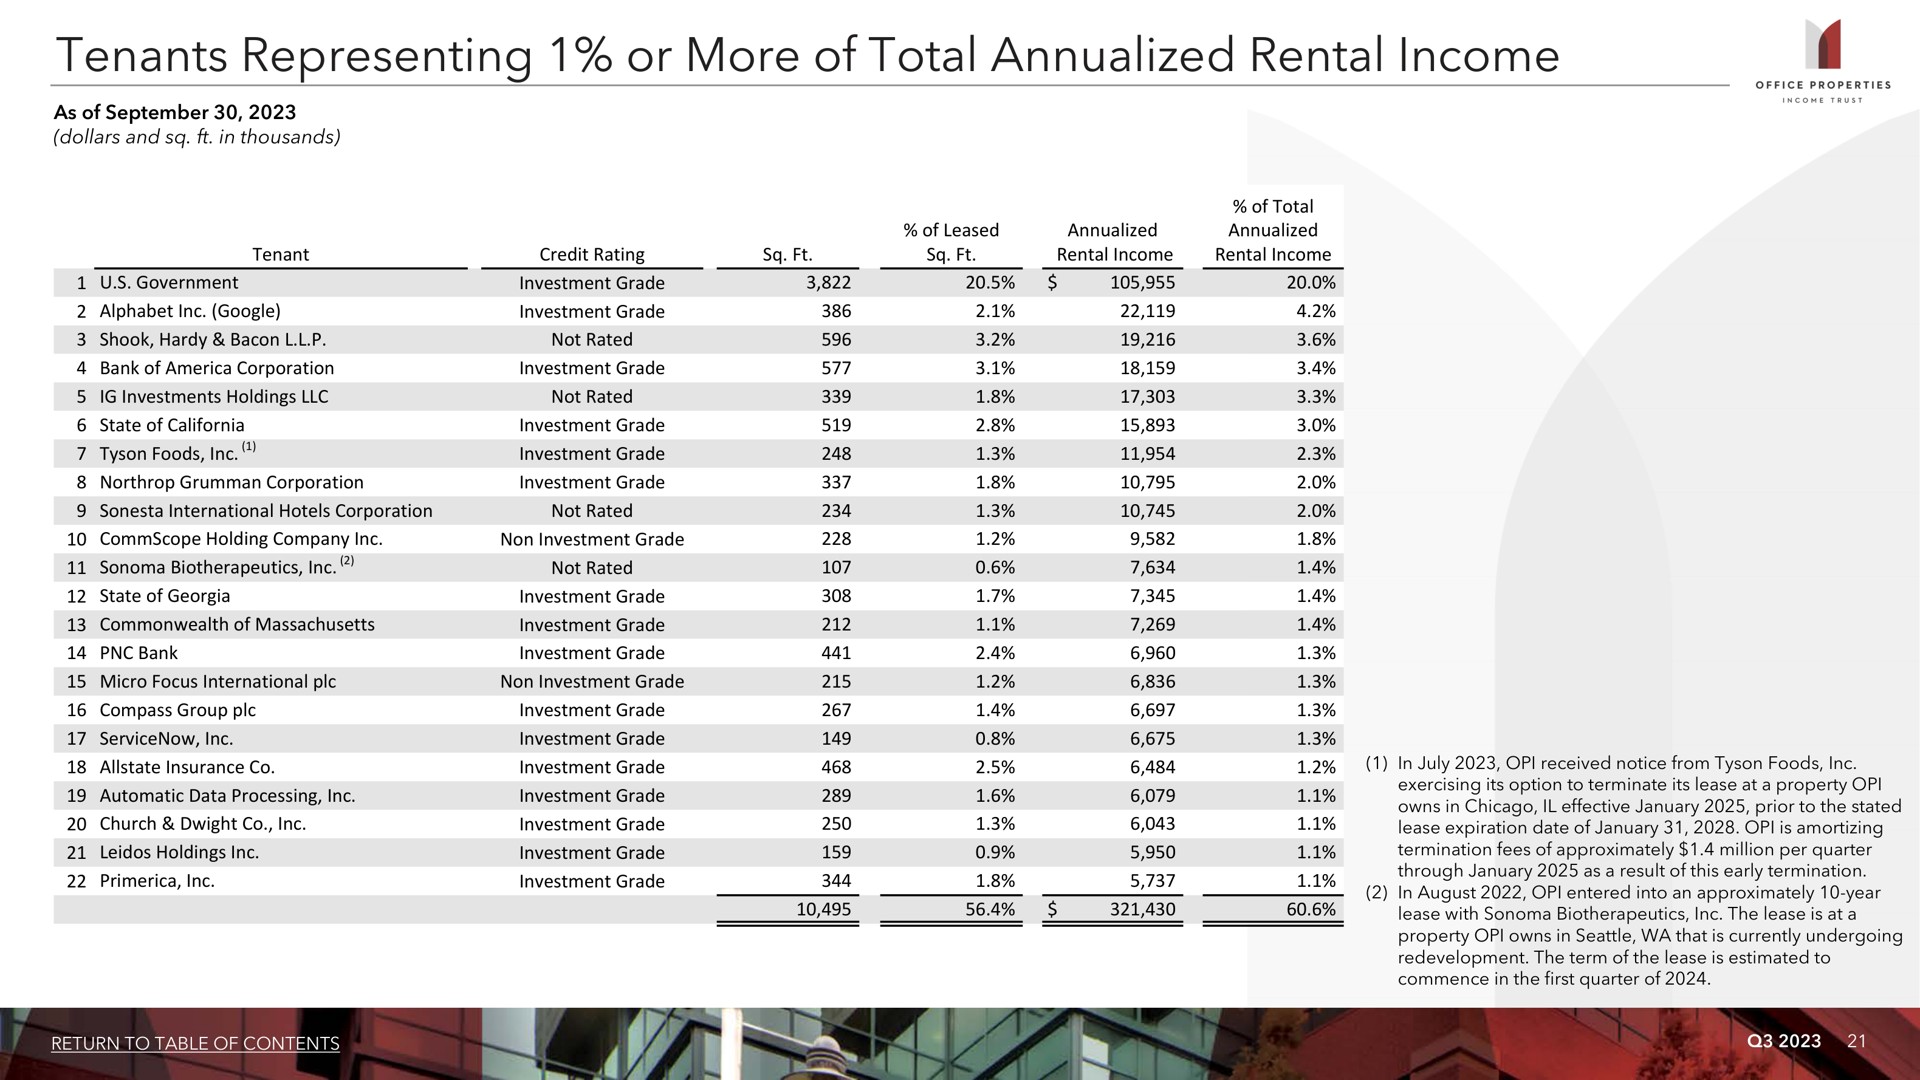 tenants representing or more of total rental income | Office Properties Income Trust